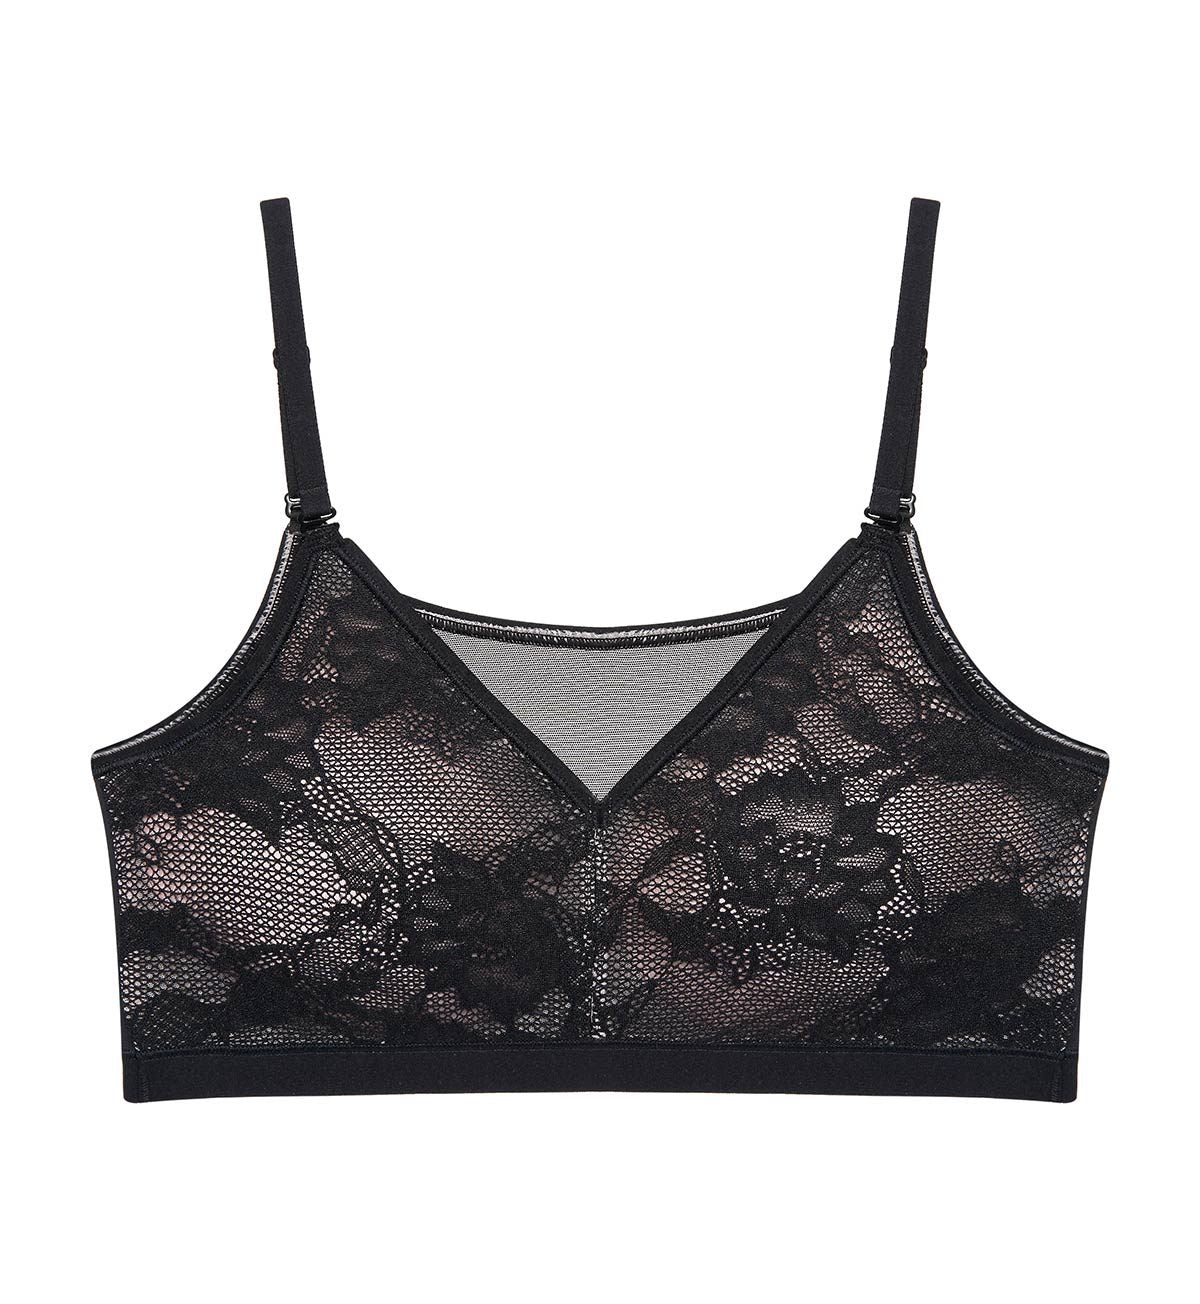 Black Seamless Padded Non-Wired Bralette